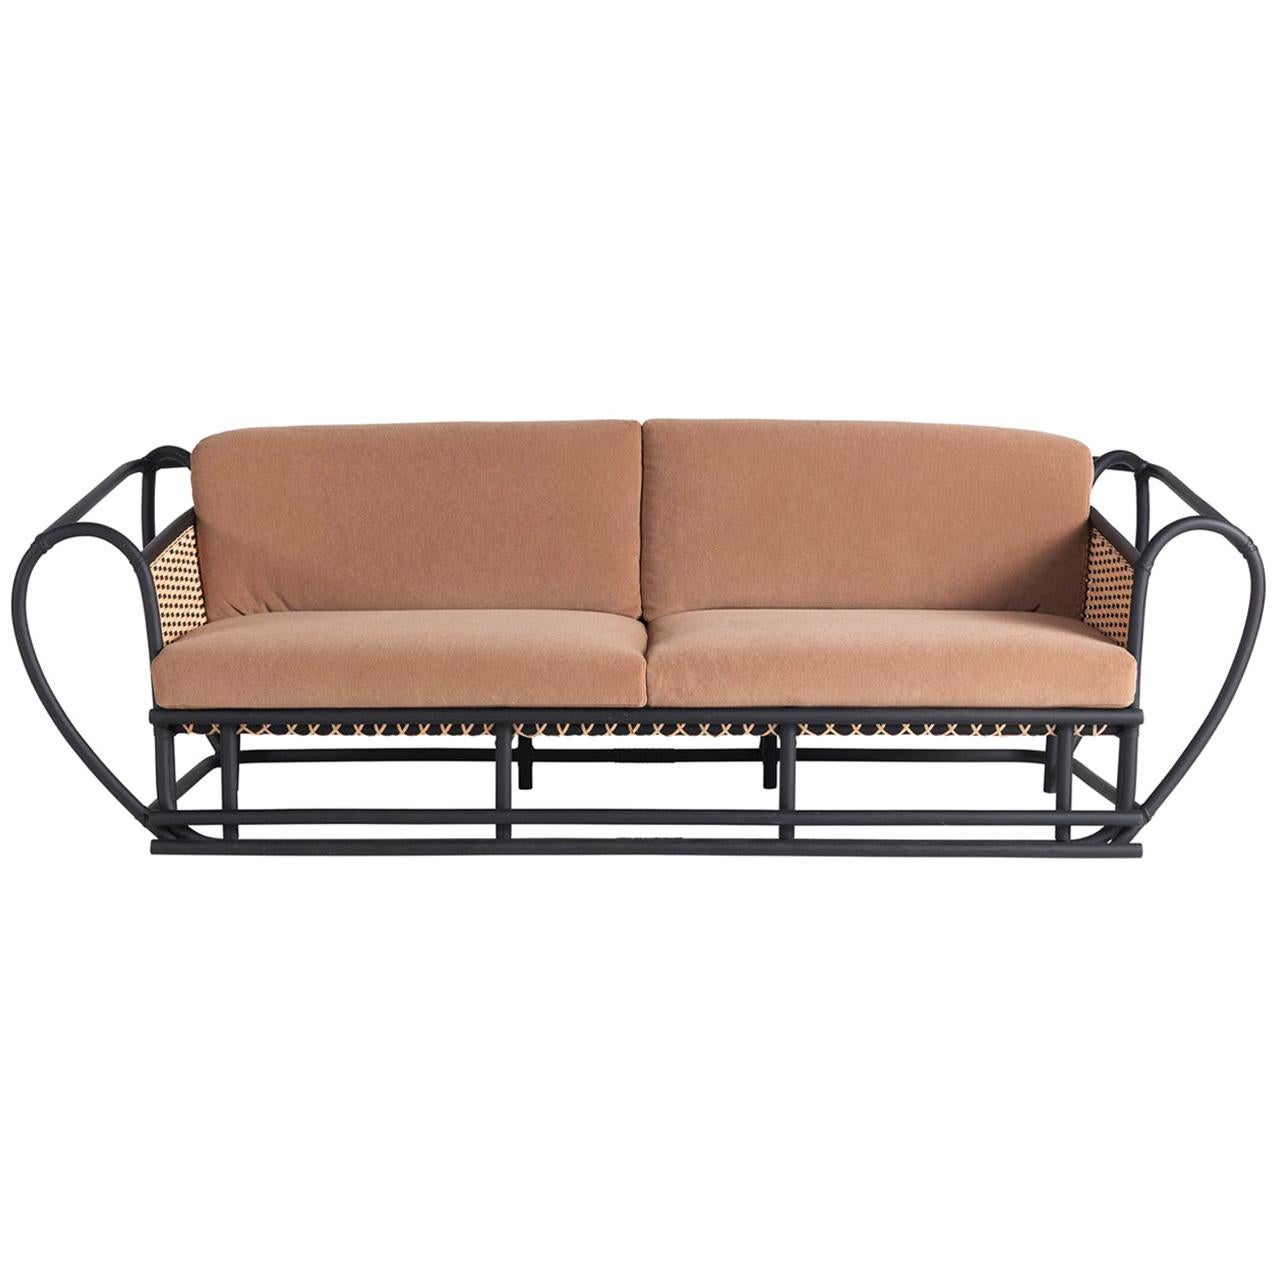 Green Channel Sofa with Black Frame For Sale